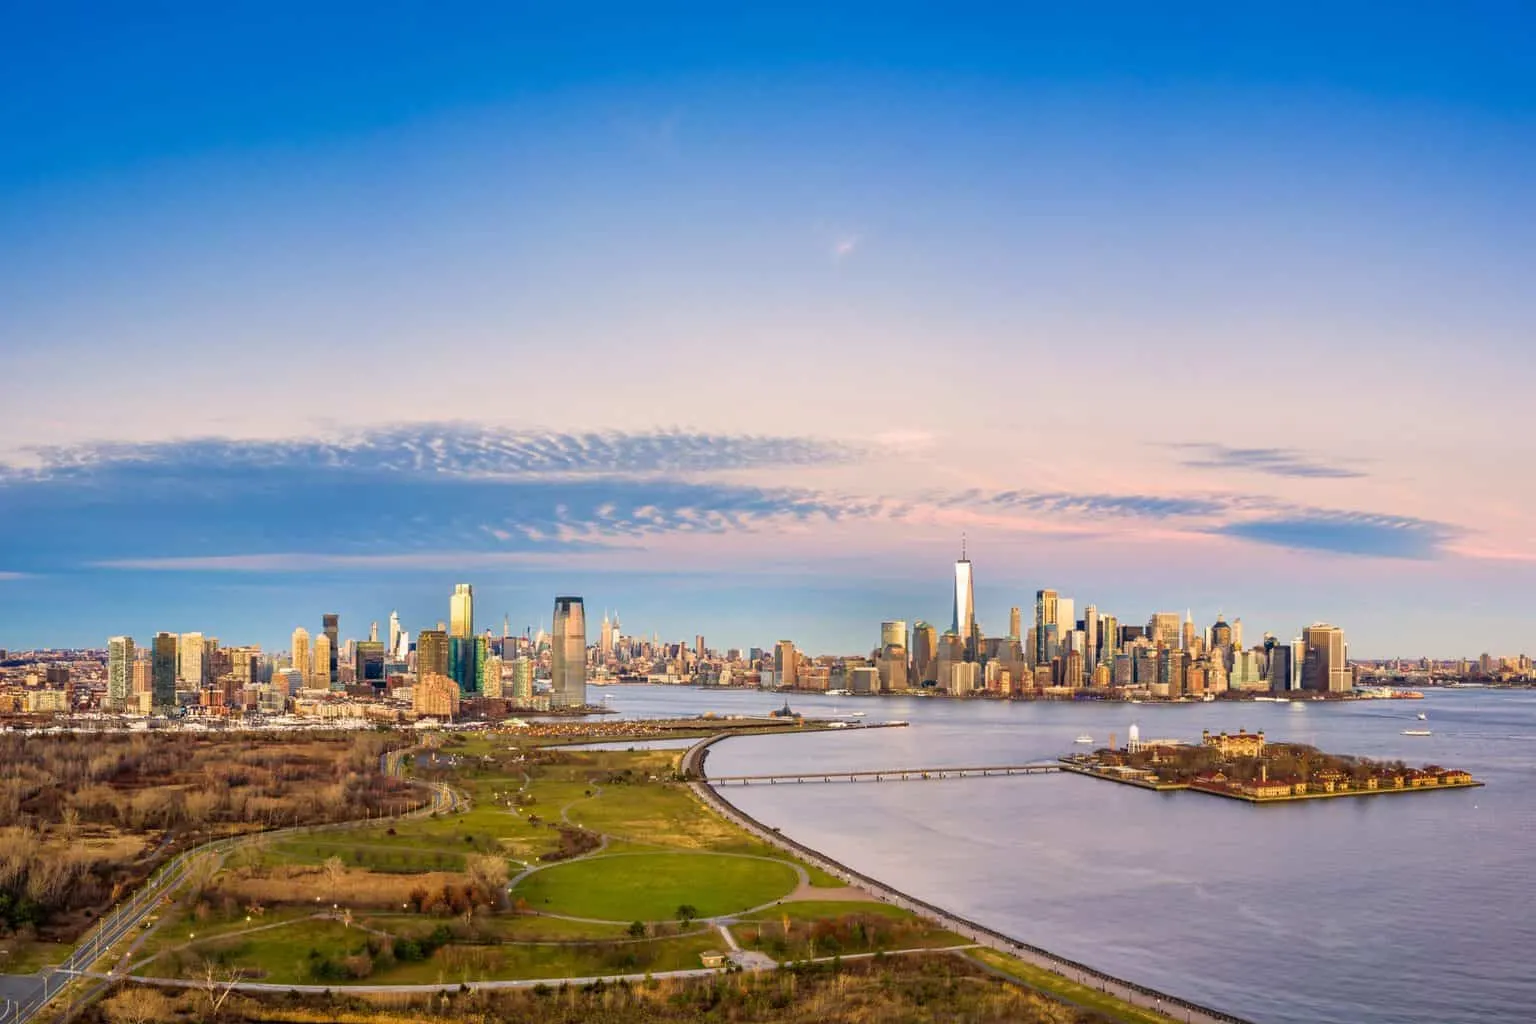 An aerial view of Liberty State Park near Jersey City, New Jersey.